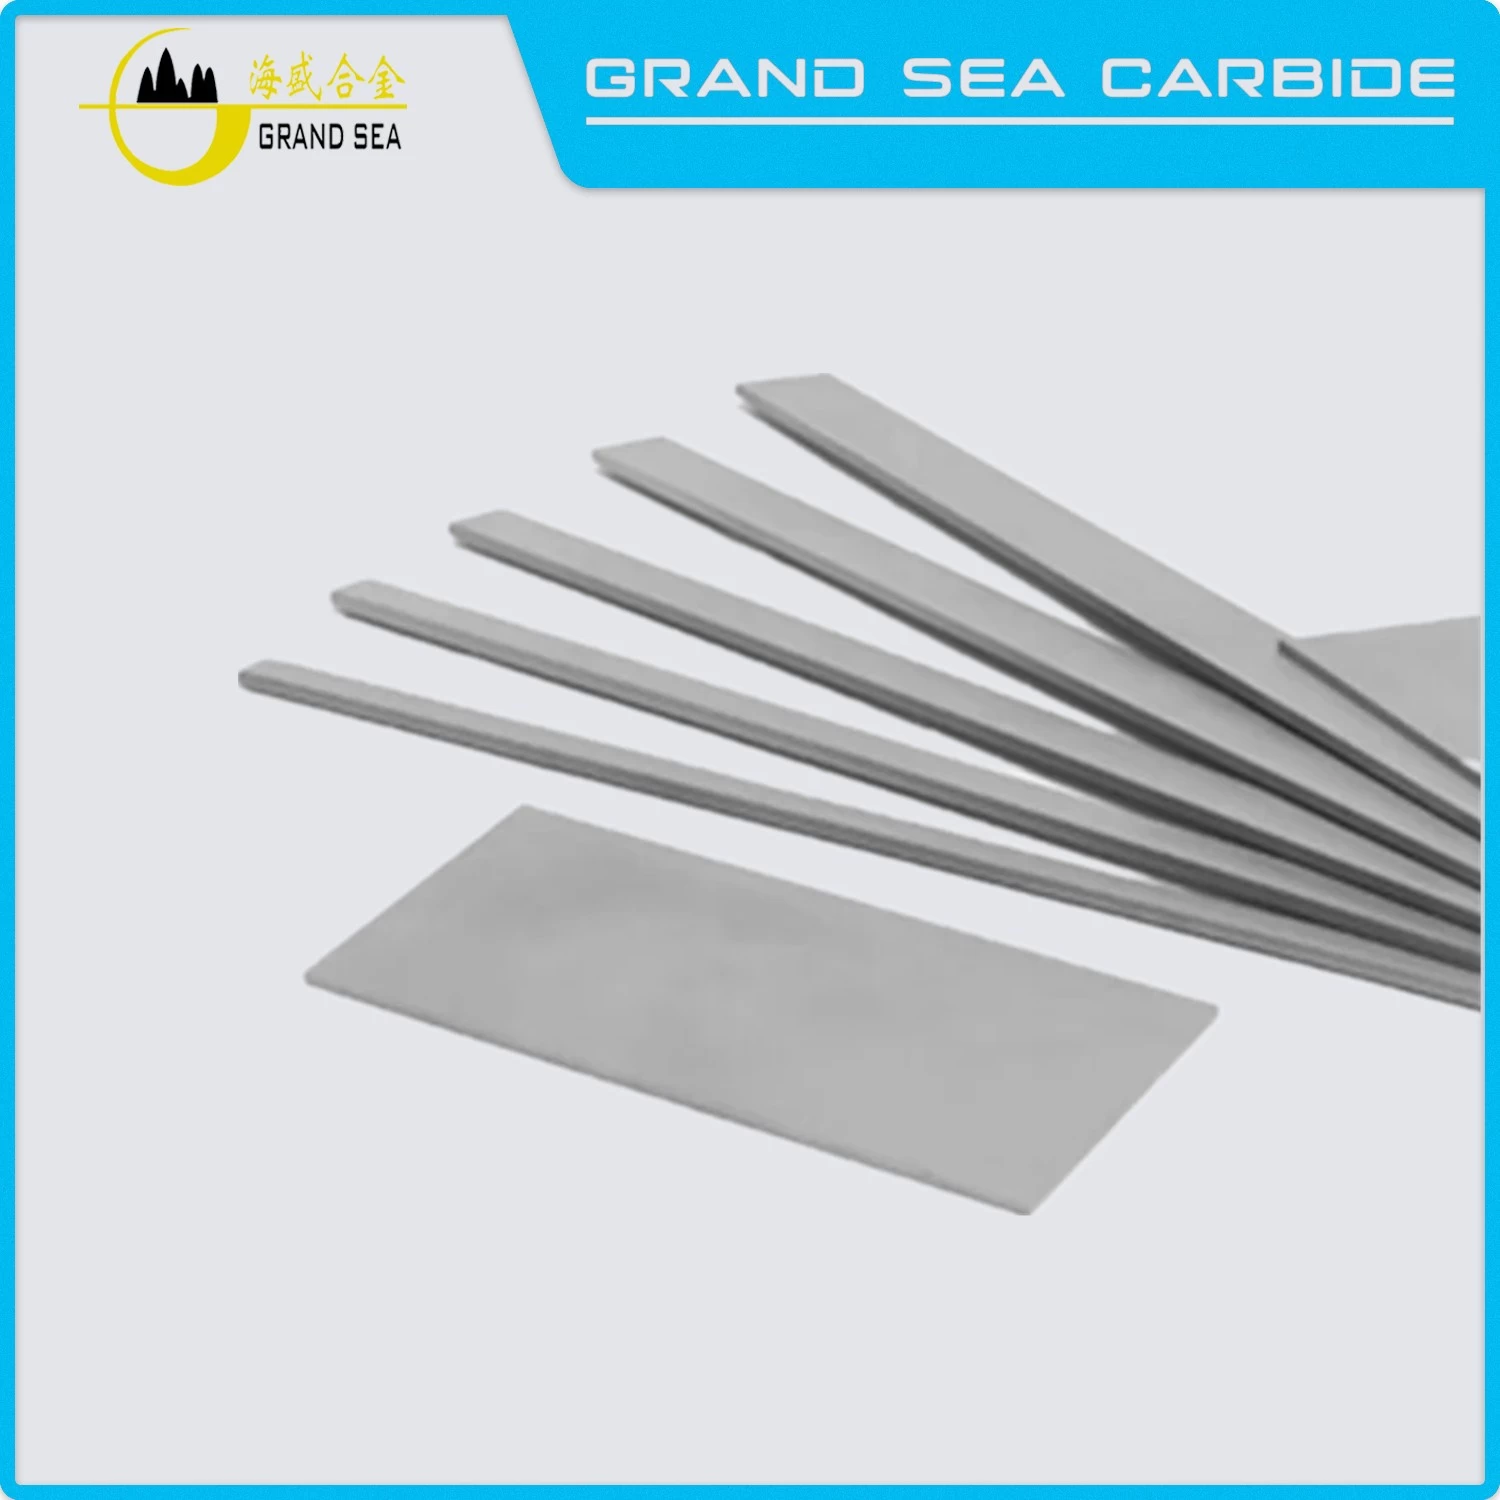 High Quality Carbide Strips Blanks in Length 395 mm